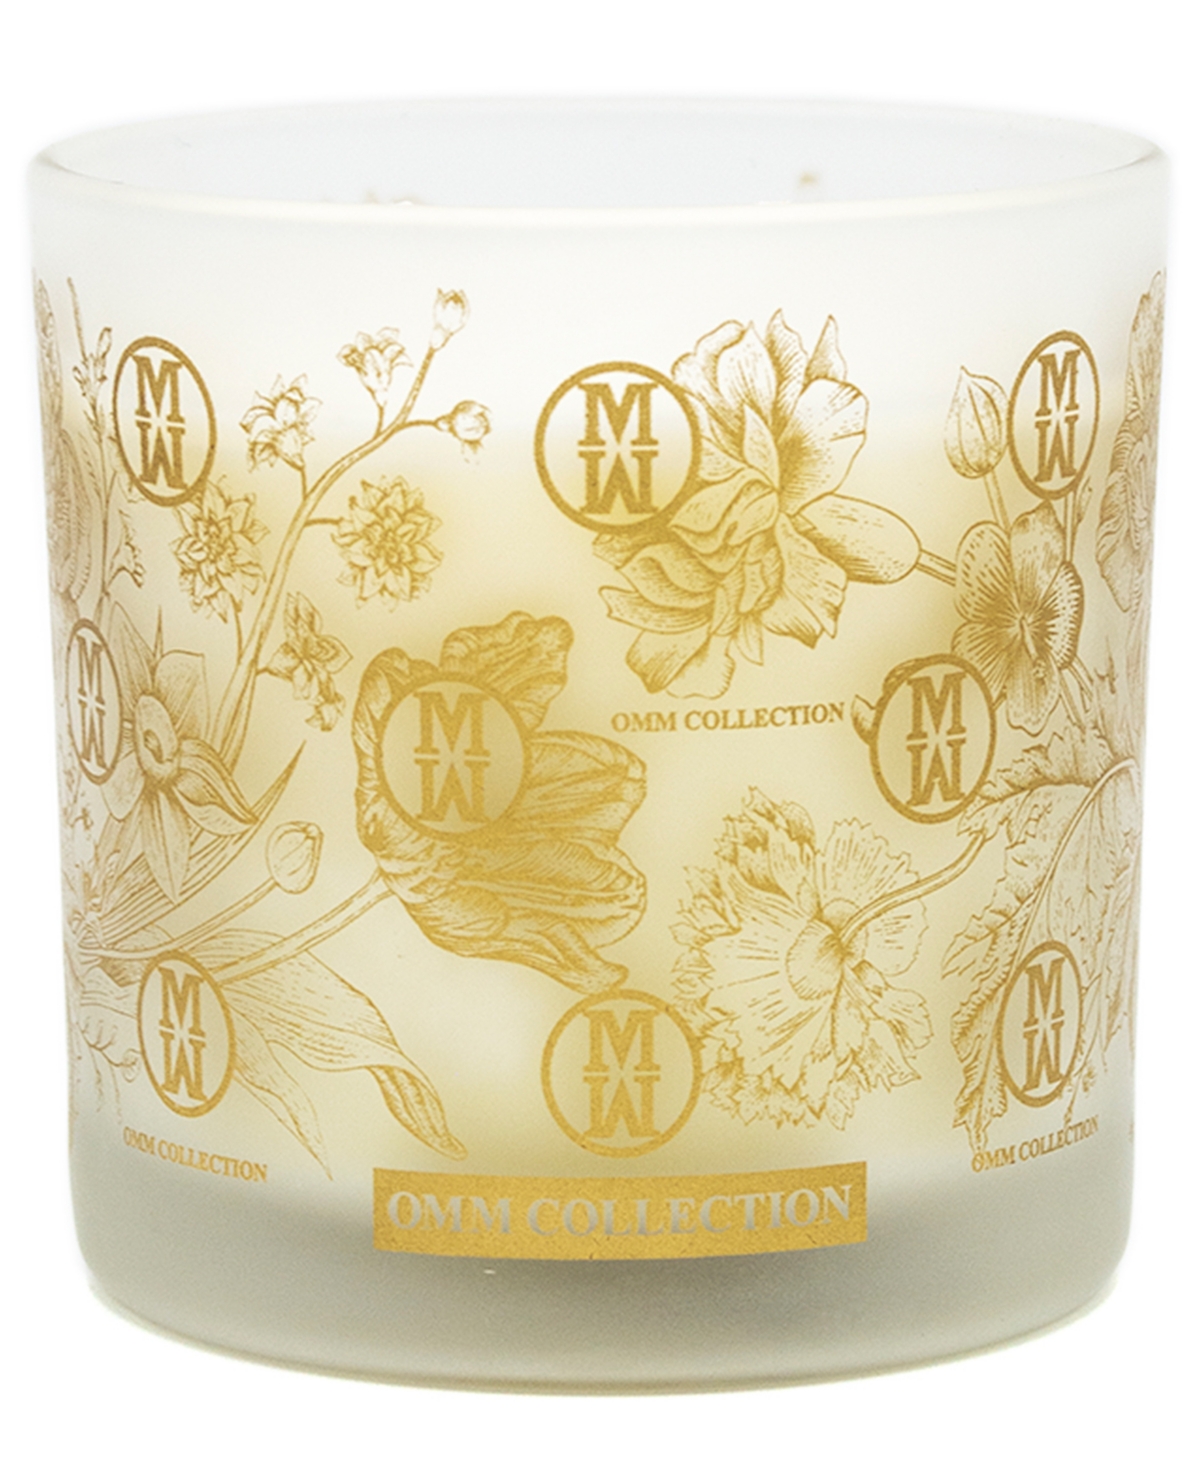 Garden Jewel Aroma Therapy Candle